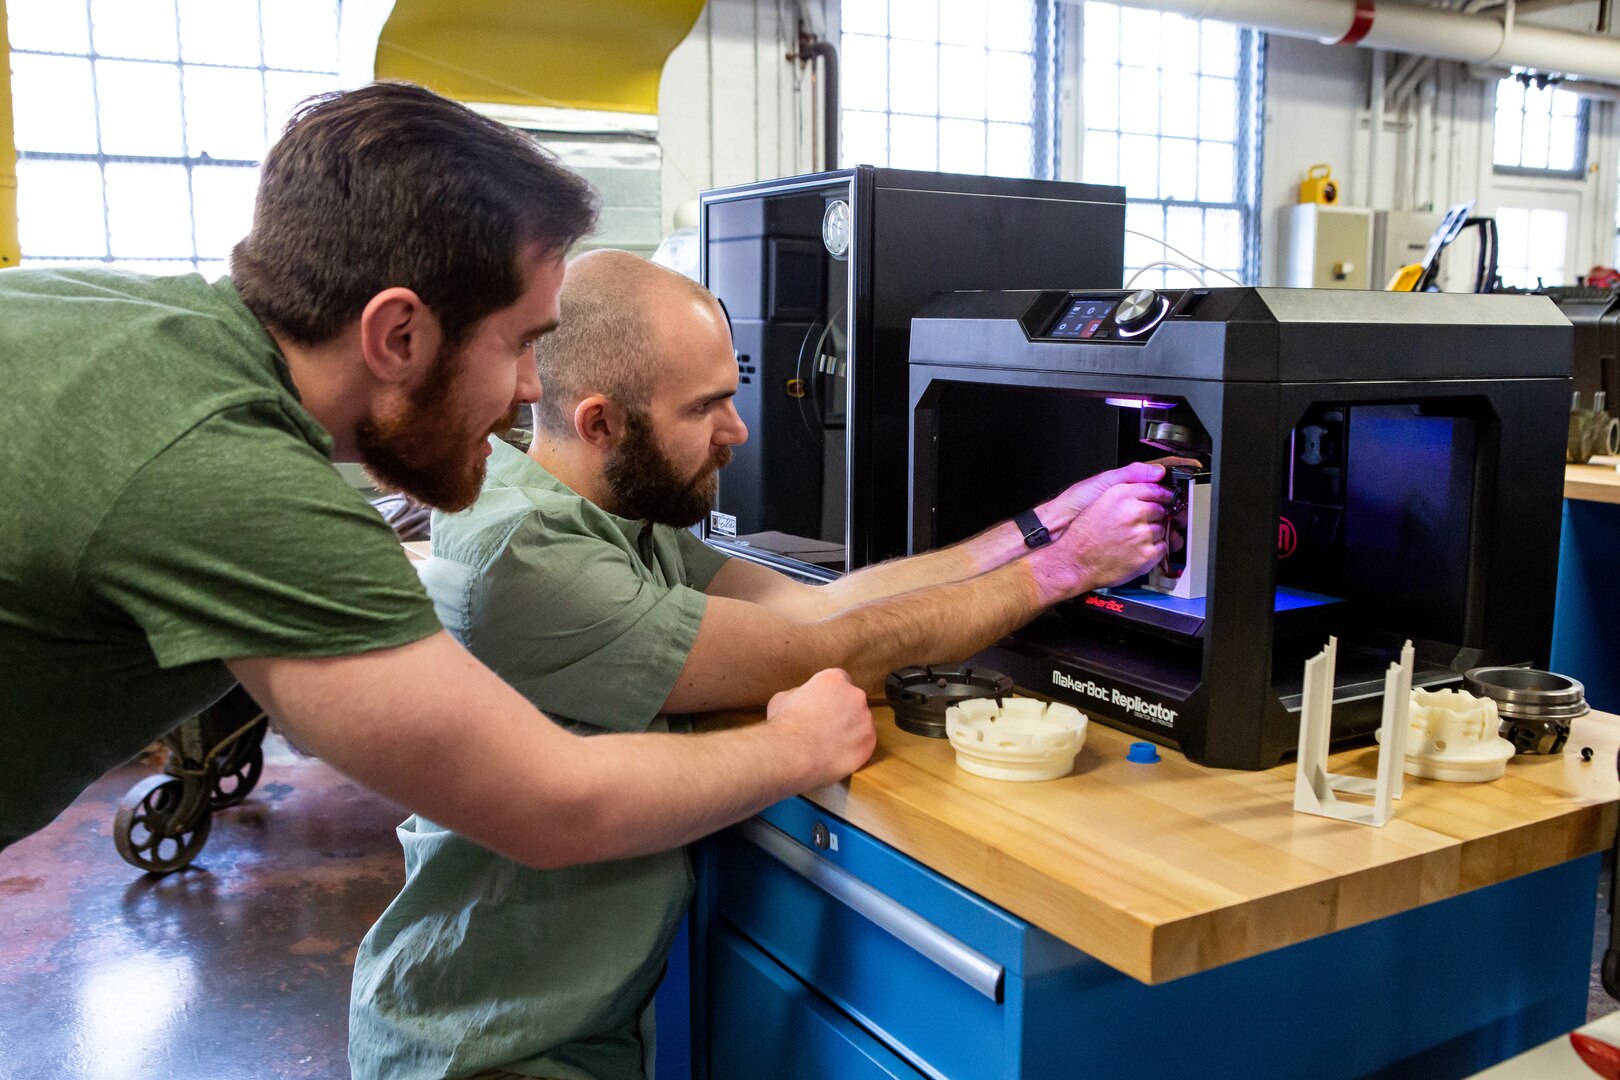 Brendon Wilkins and Matthew Perkinson from Norfolk Naval Shipyard's Technology and Innovation (T&I) Lab, work on a 3-D printer.